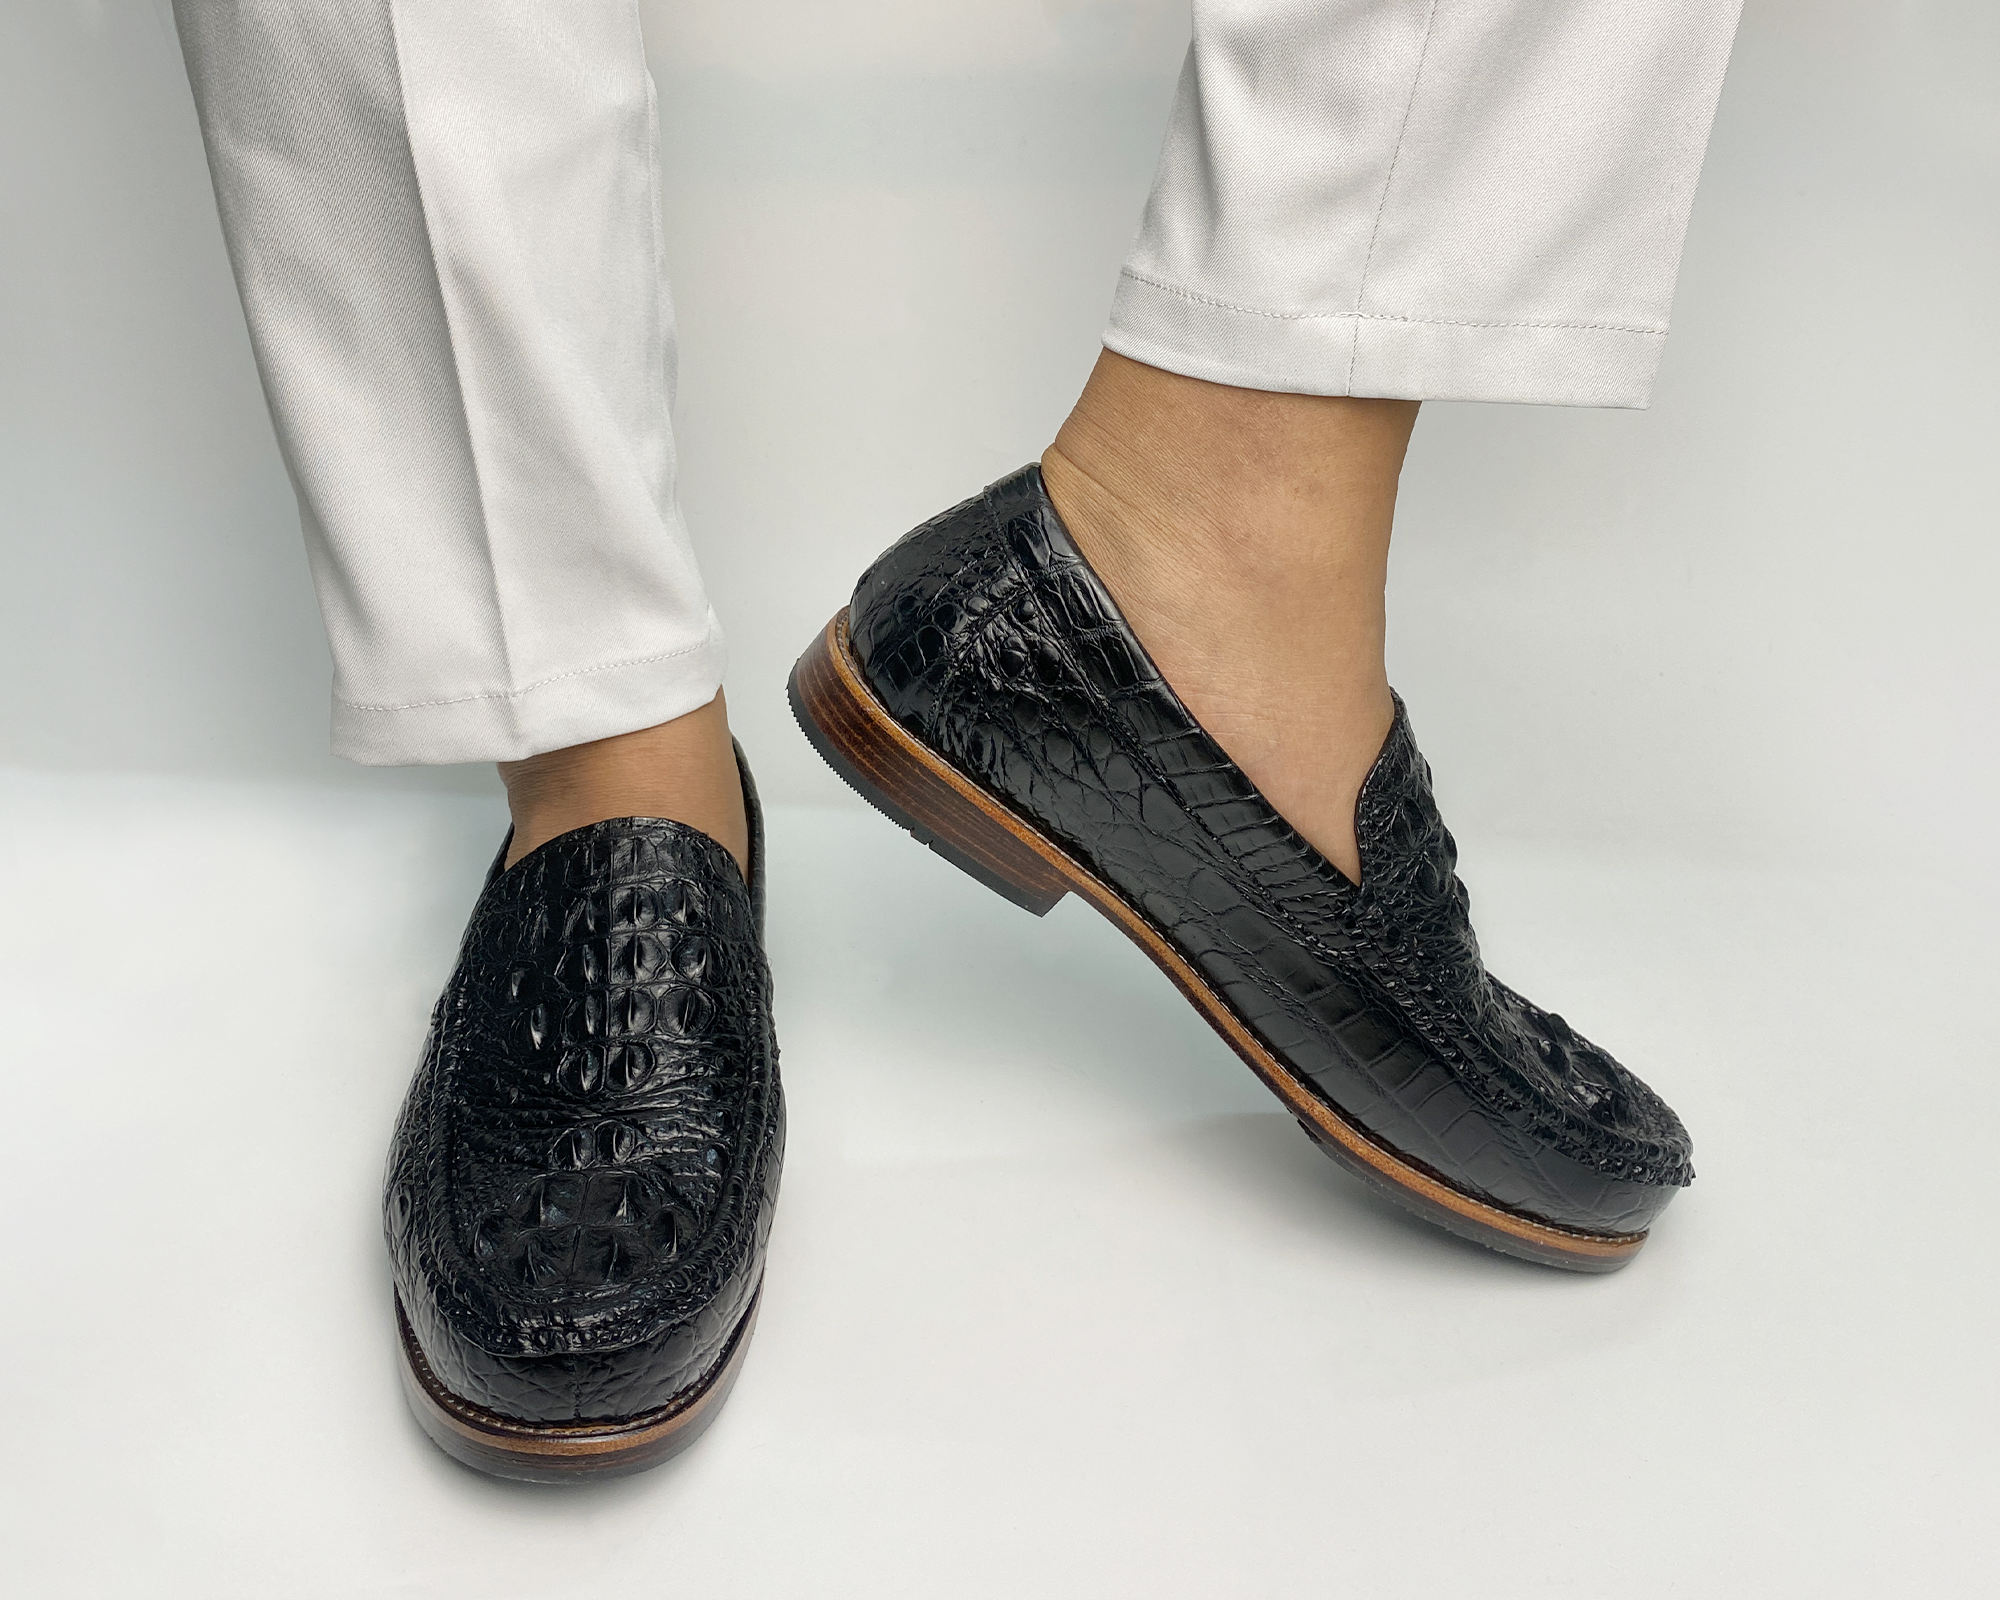 Black Alligator Leather Mens Penny Loafers | Crocodile Belly Skin Casual Loafer | SH41E42